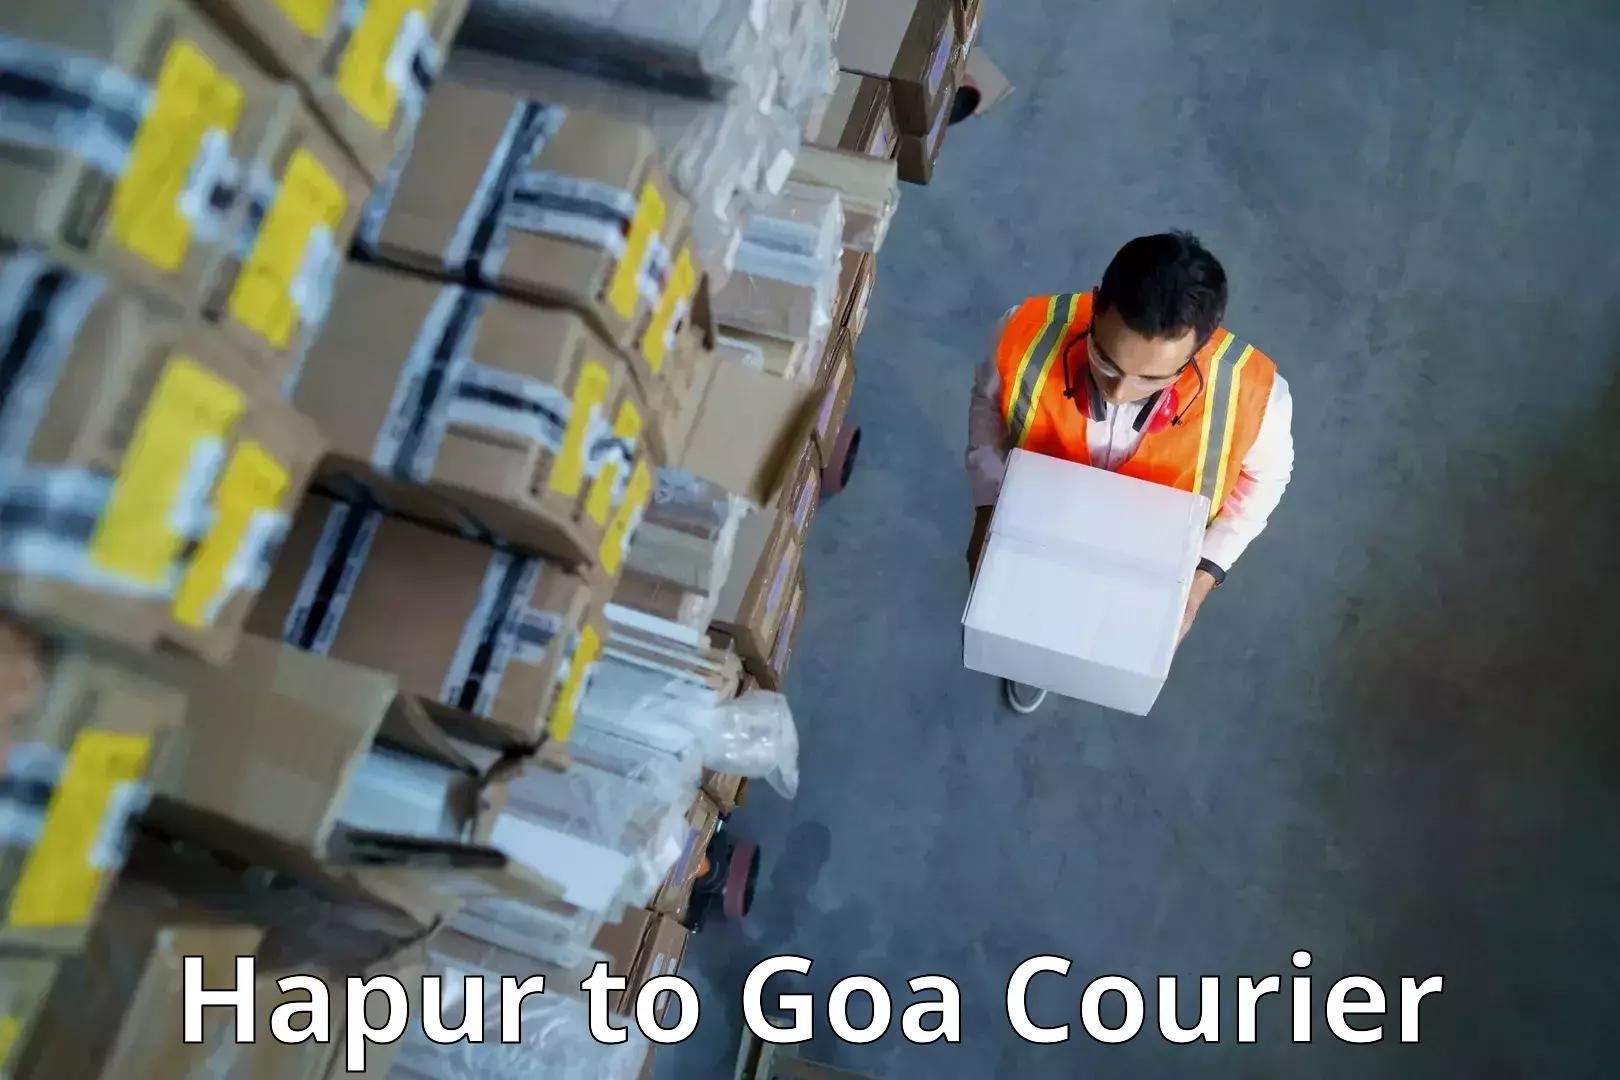 On-call courier service Hapur to Goa